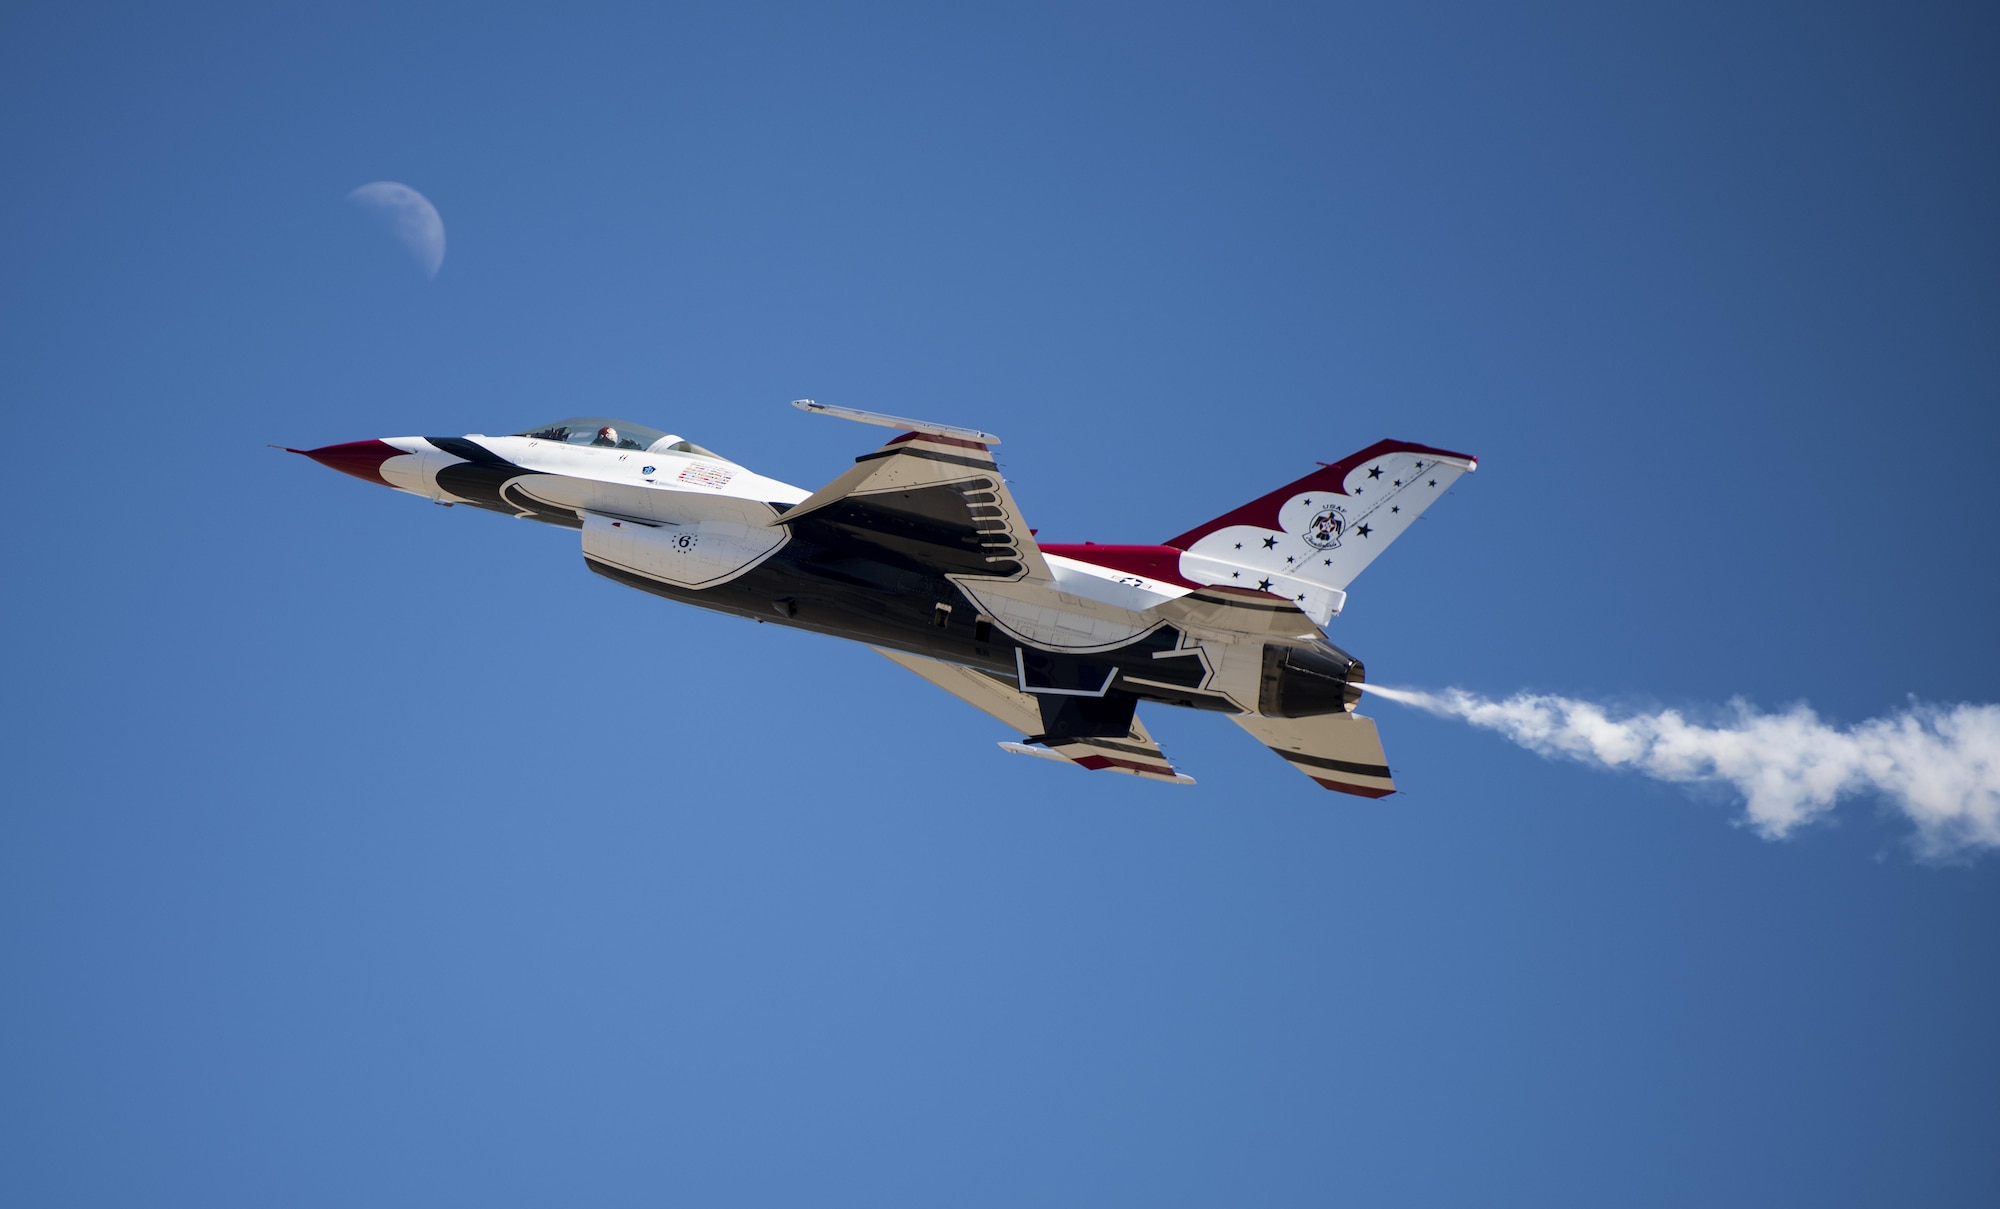 A U.S. Air Force Aerial Demonstration Squadron “Thunderbird” F-16 Fighting Falcon reaches for the moon July 29, 2017, at Fairchild Air Force Base, Washington.  The Thunderbirds switched from what? to the F-16A Fighting Falcon on June 22, 1982. (U.S. Air Force photo/ Senior Airman Sean Campbell)  